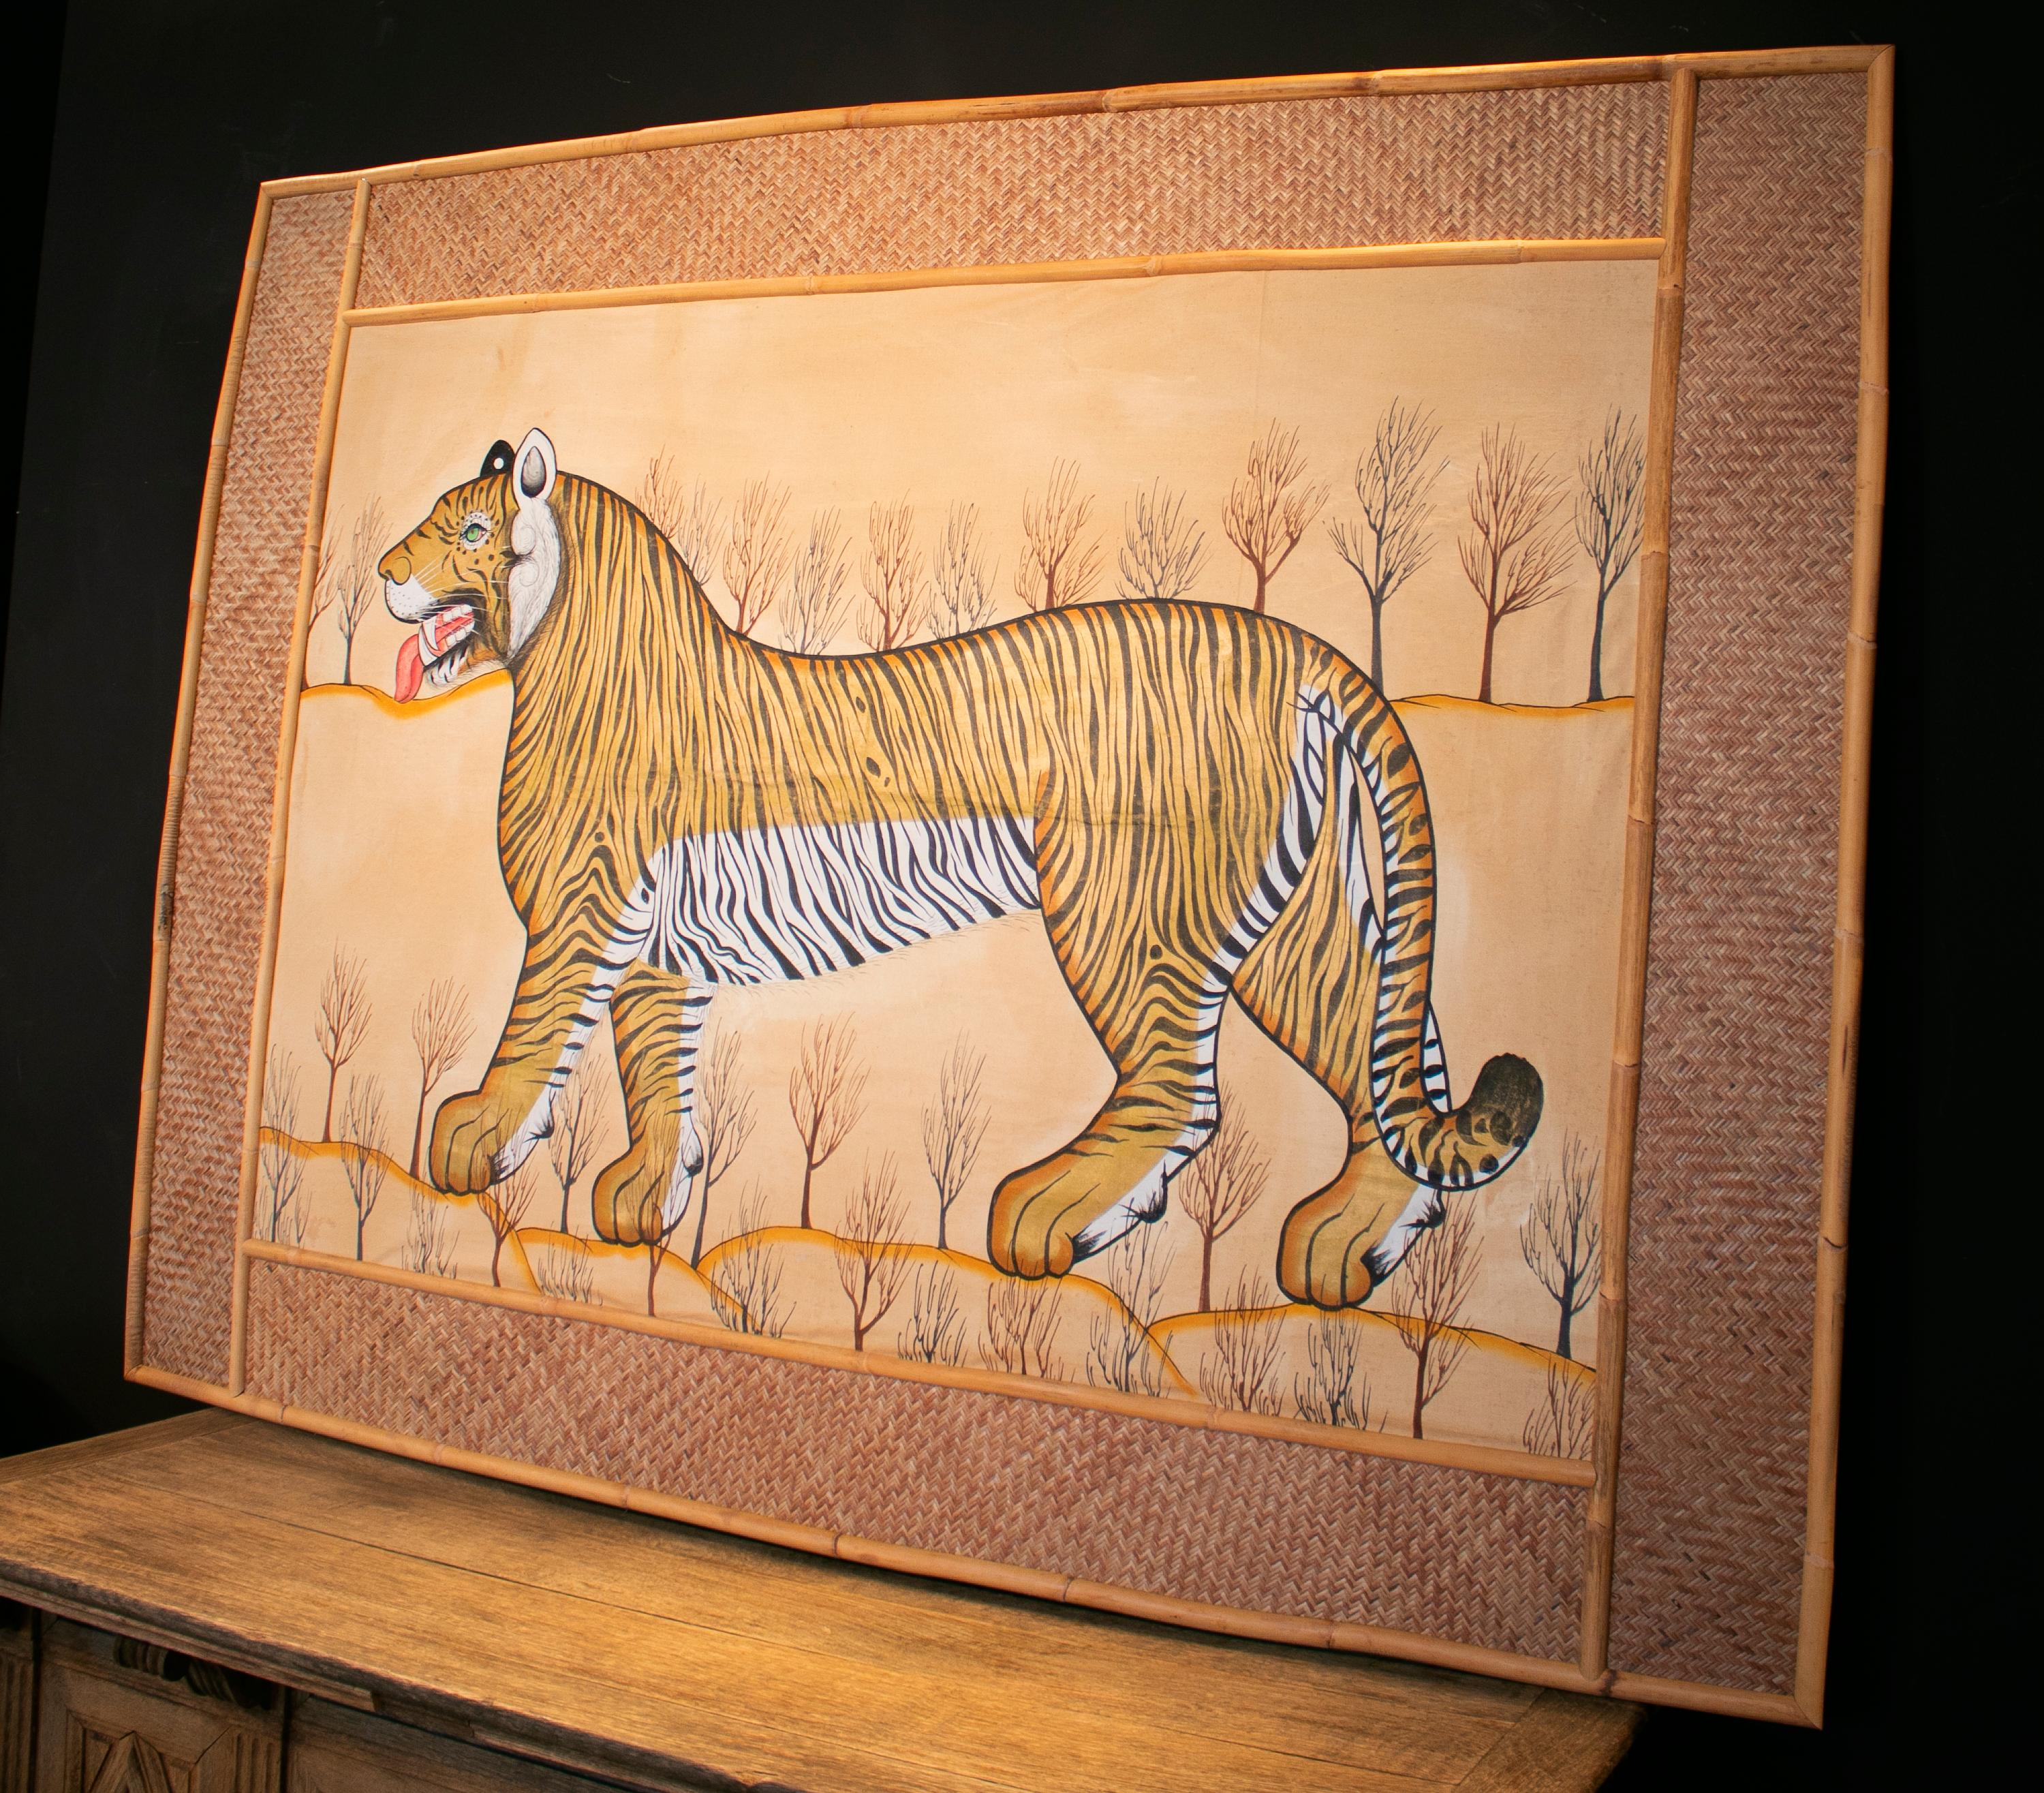 Jaime Parlade designed tiger hand drawn on fabric and framed in bamboo and woven Indian straw.